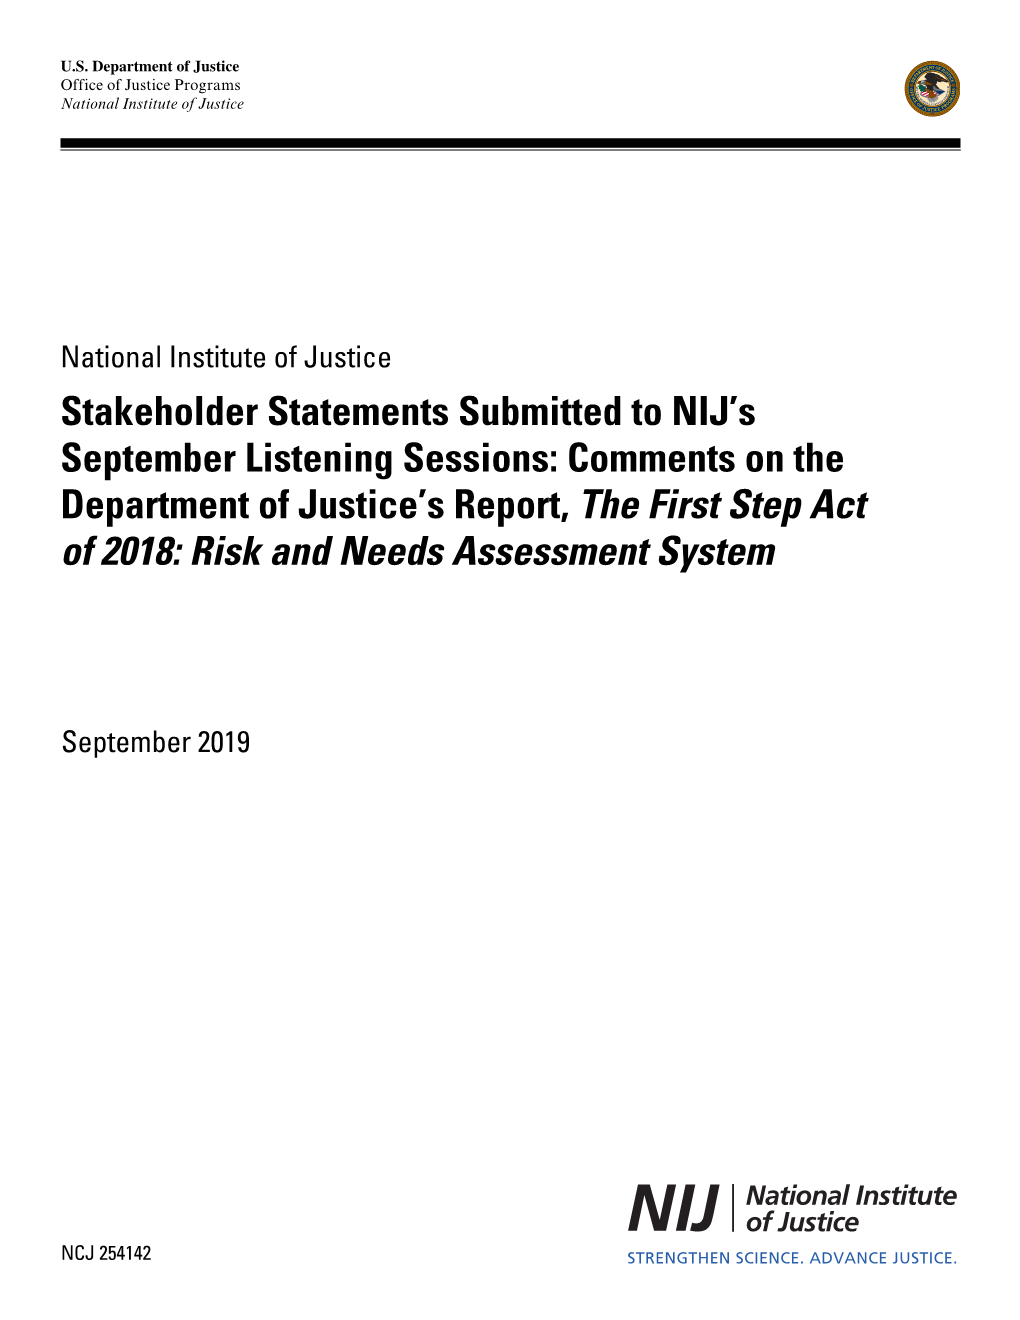 Stakeholder Statements Submitted to NIJ's September Listening Sessions